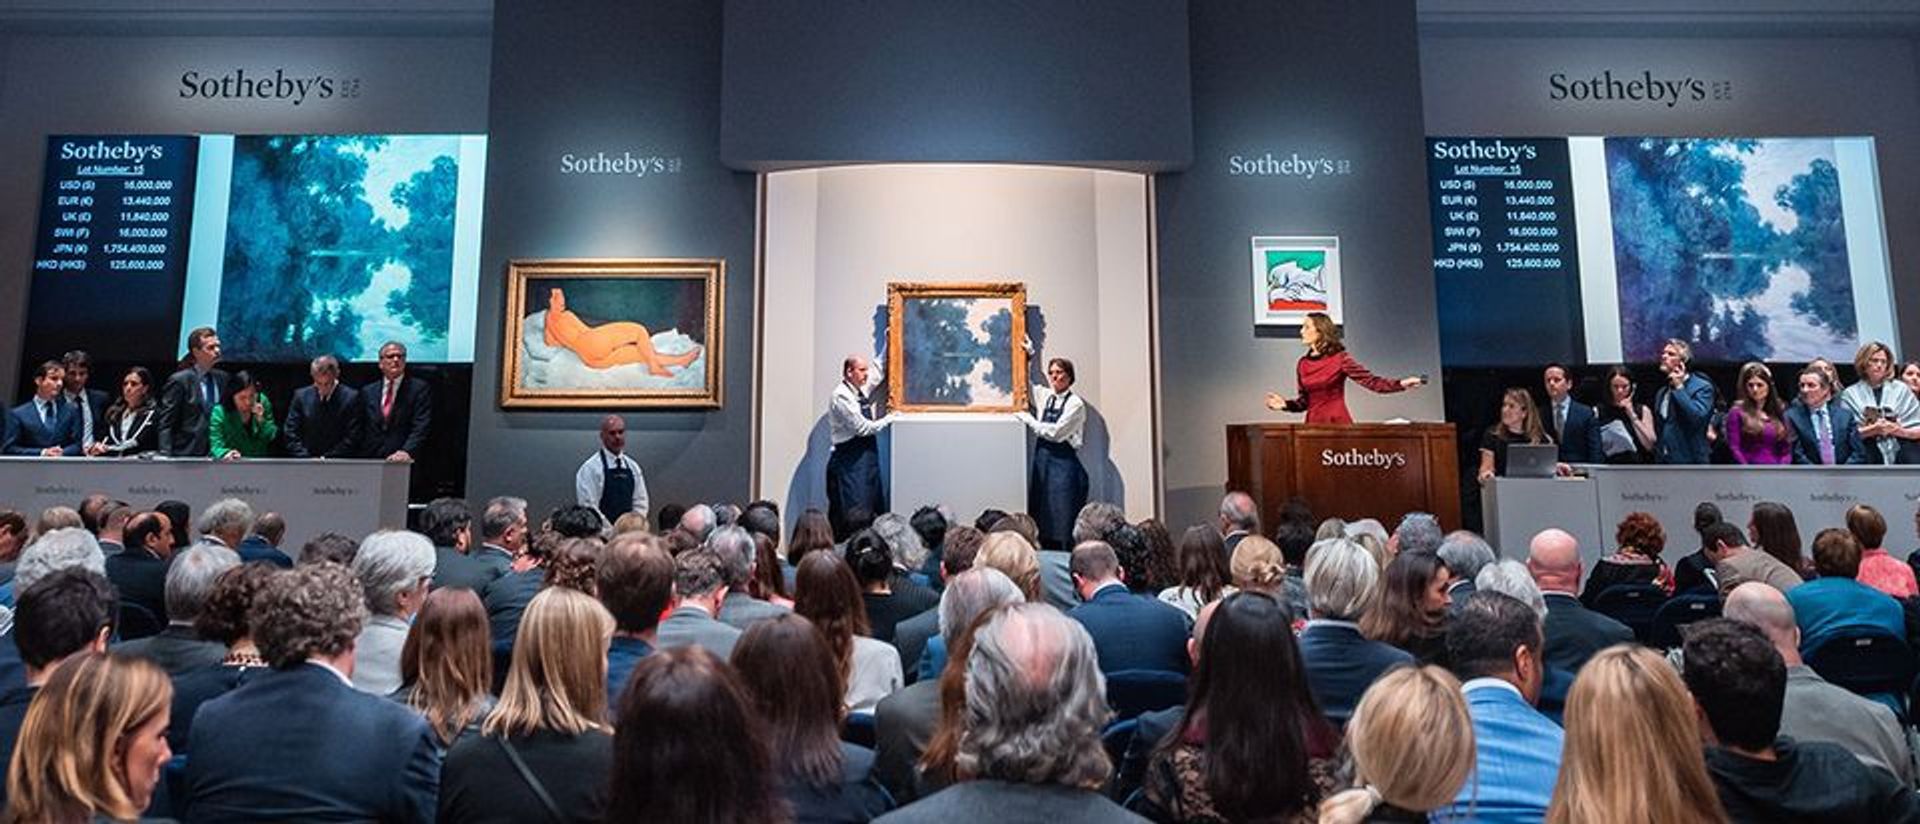 Sotheby's Auction Commission Margin (ACM) rebounded to 17.1% in the fourth quarter after dipping to 16.1% due to the lacklustre sale of two "extra expensive" guaranteed works in May, including such as Amedeo Modigliani’s Nu couché, which sold on its low estimate of $150m to an irrevocable bidder. Sotheby's